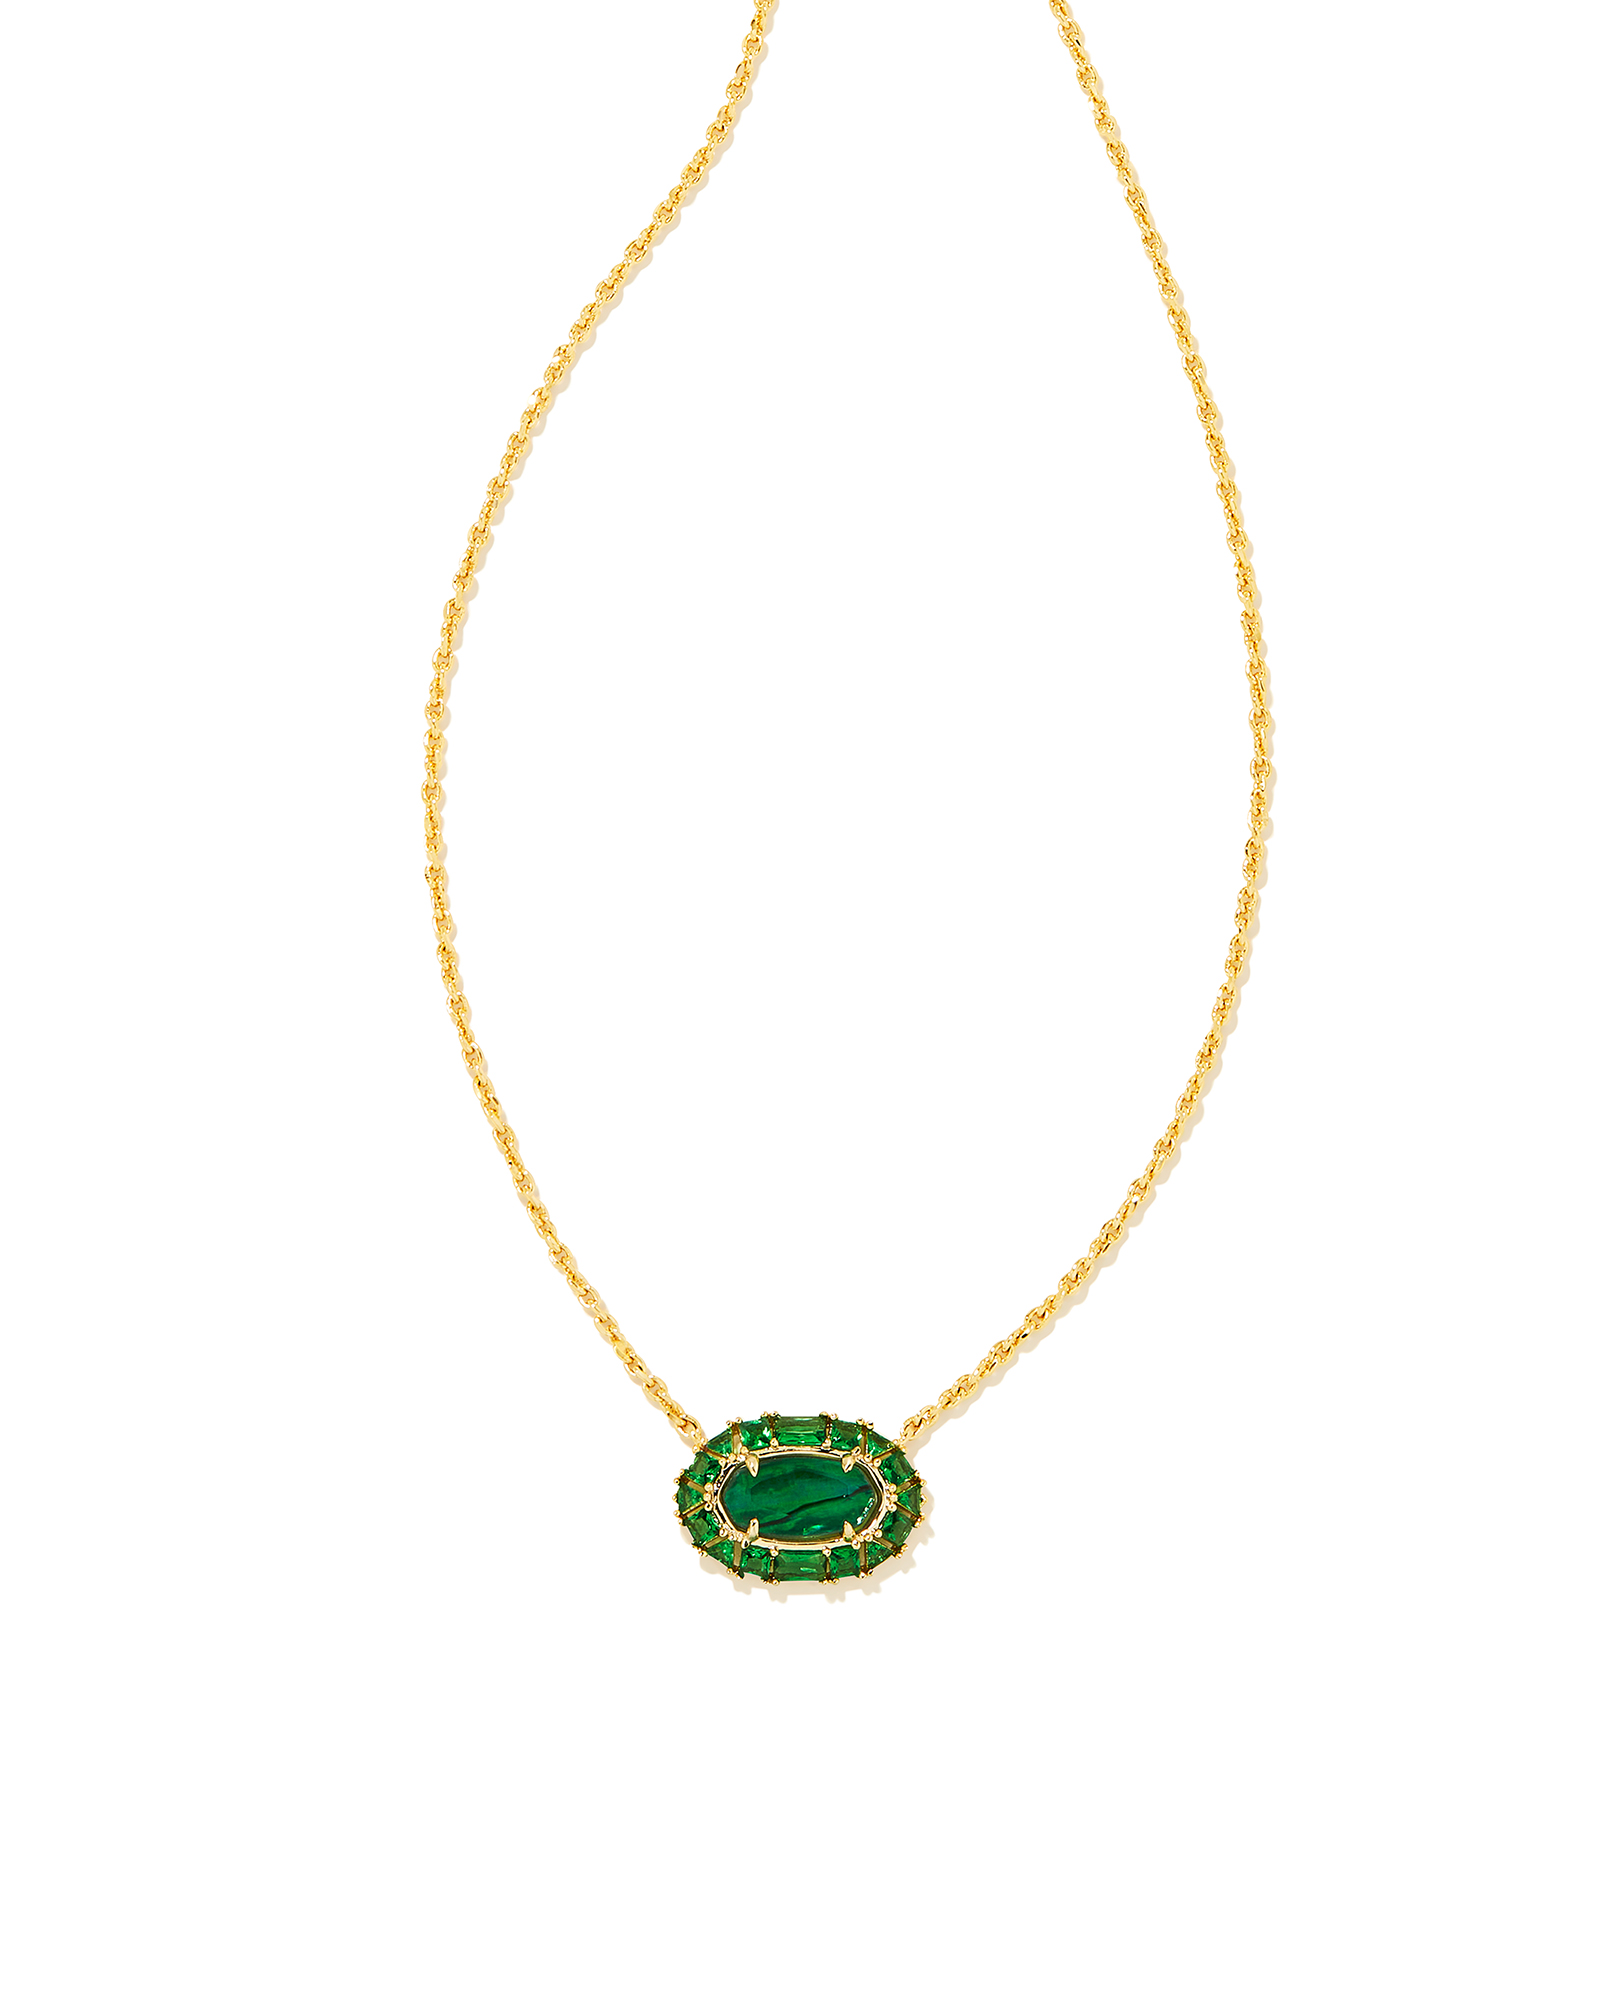 Kendra Scott Blair Gold Butterfly Pendant Necklace in Emerald Mix  9608802892 - Jacob Time Inc